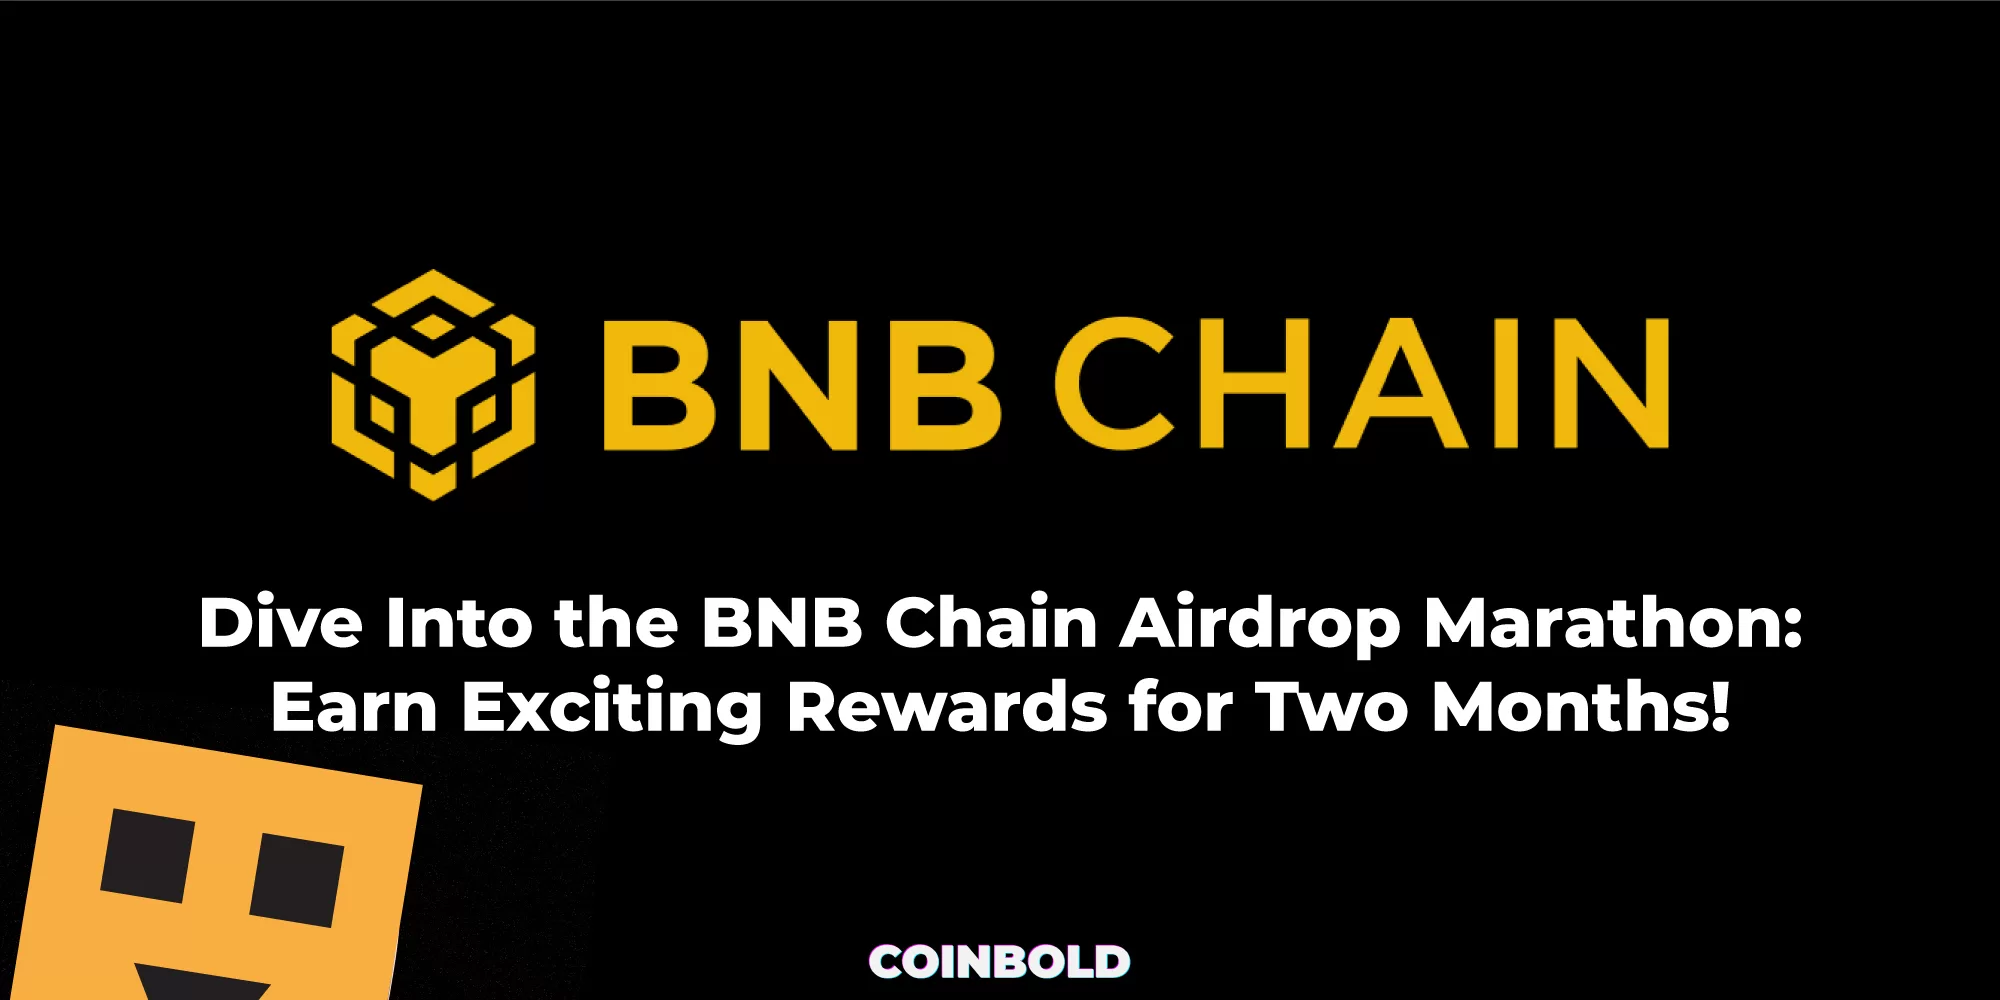 Dive Into the BNB Chain Airdrop Marathon Earn Exciting Rewards for Two Months 1 jpg.webp